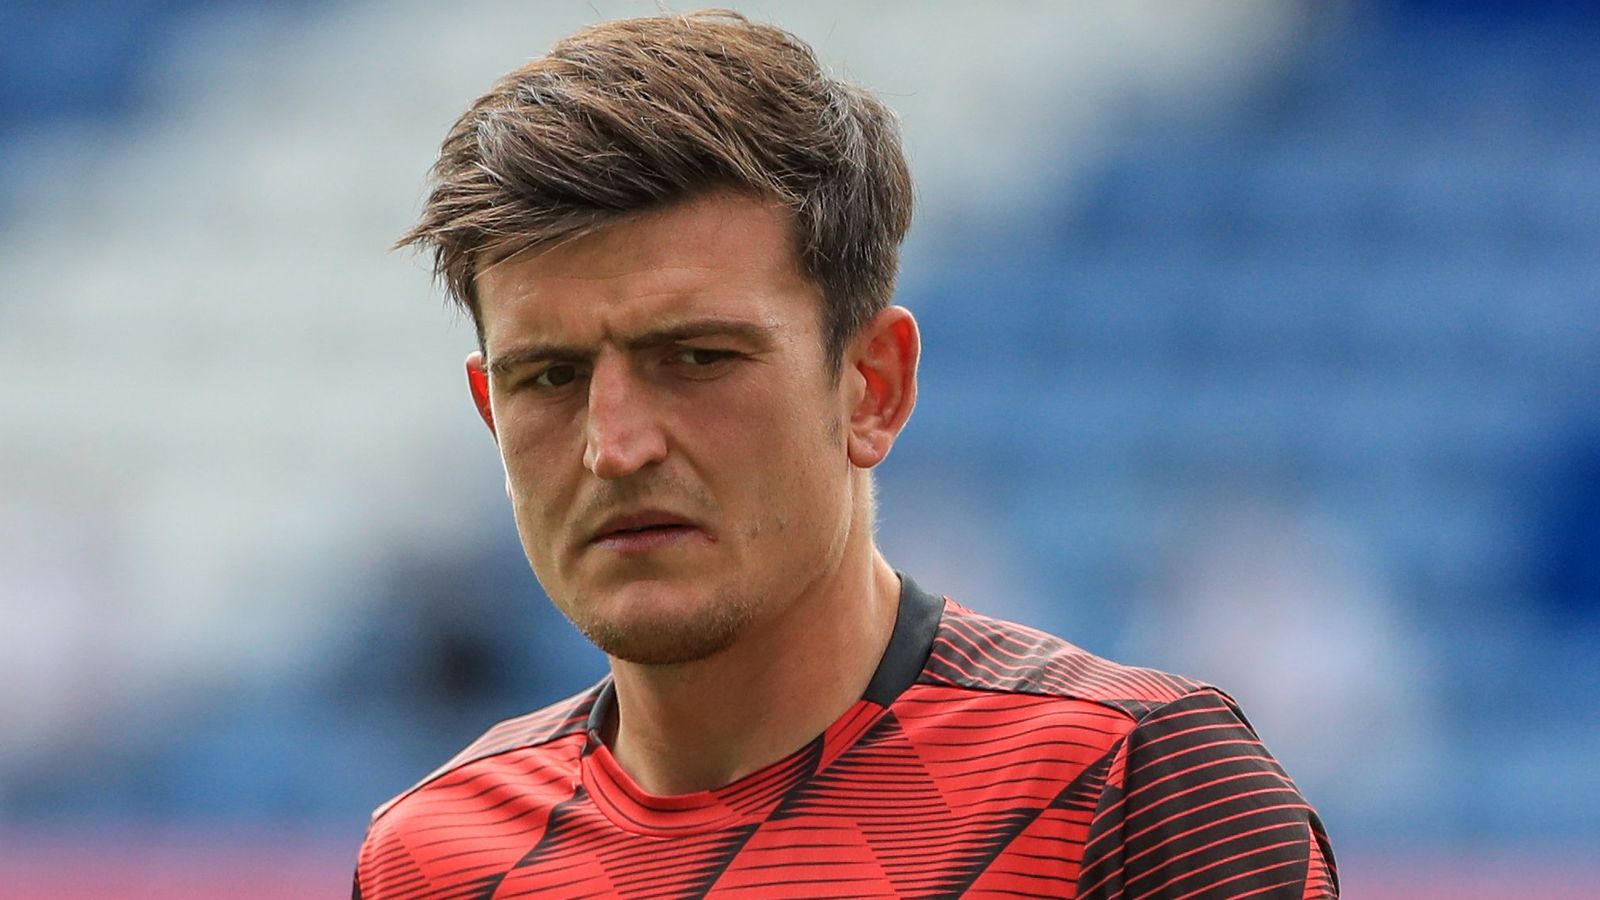 Harry Maguire Brawl Sparked After Sister Injected With Suspected Rape Drug Court Hears Uk News Sky News